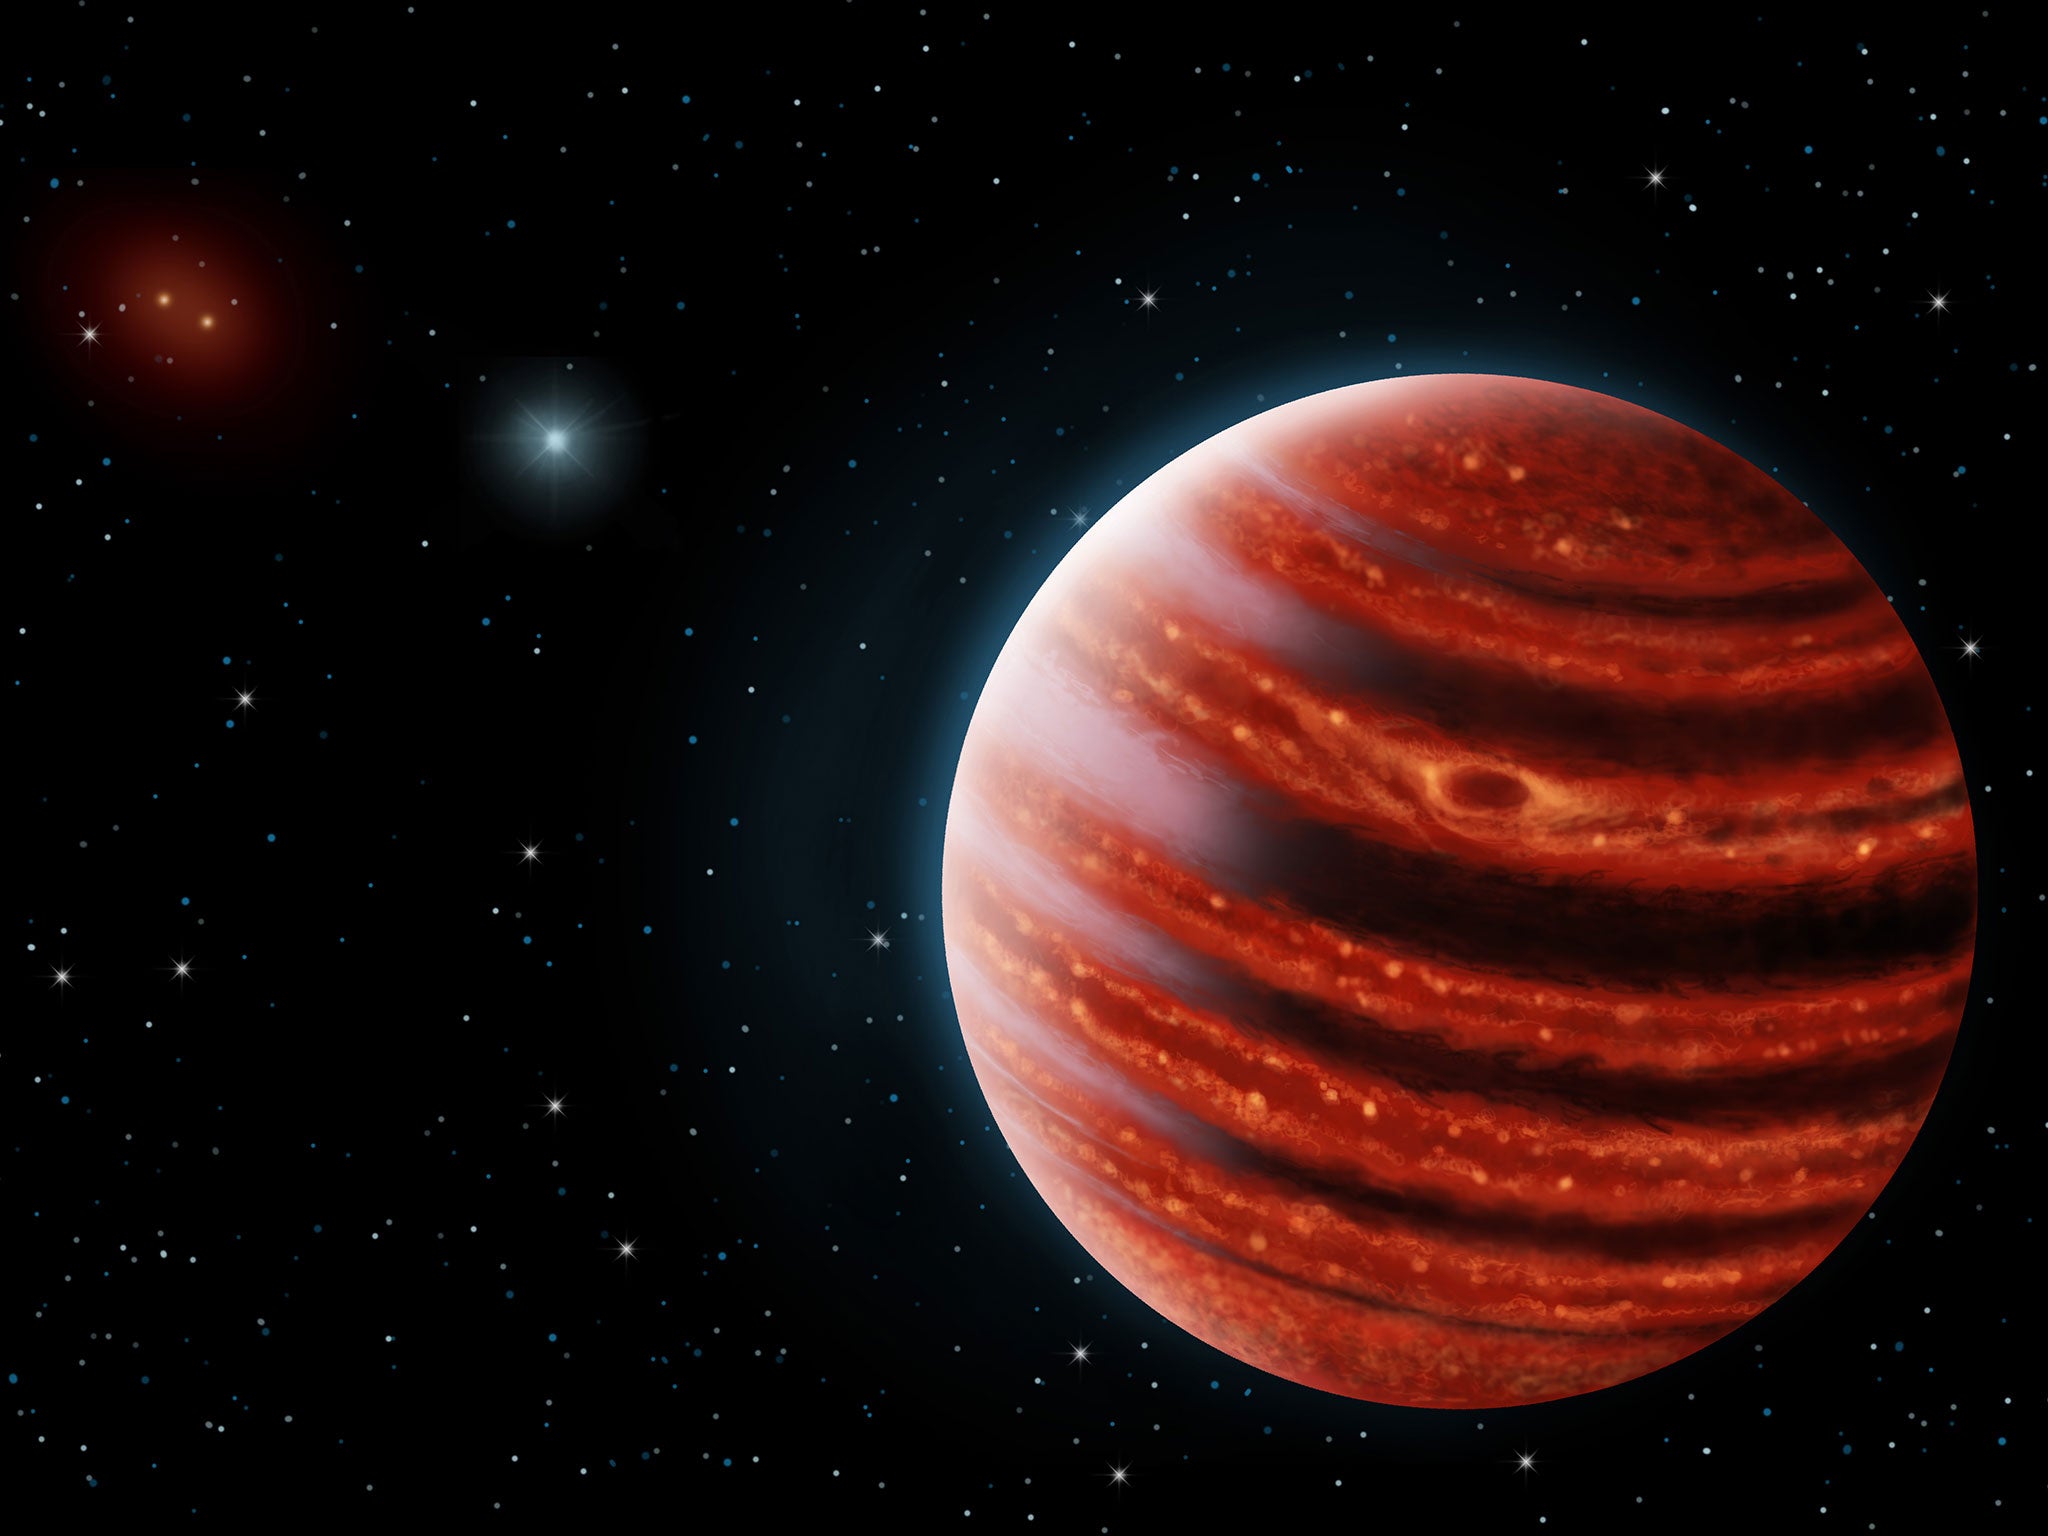 An artist’s illustration of the exoplanet 51 Eridani b – some 100 light years from Earth